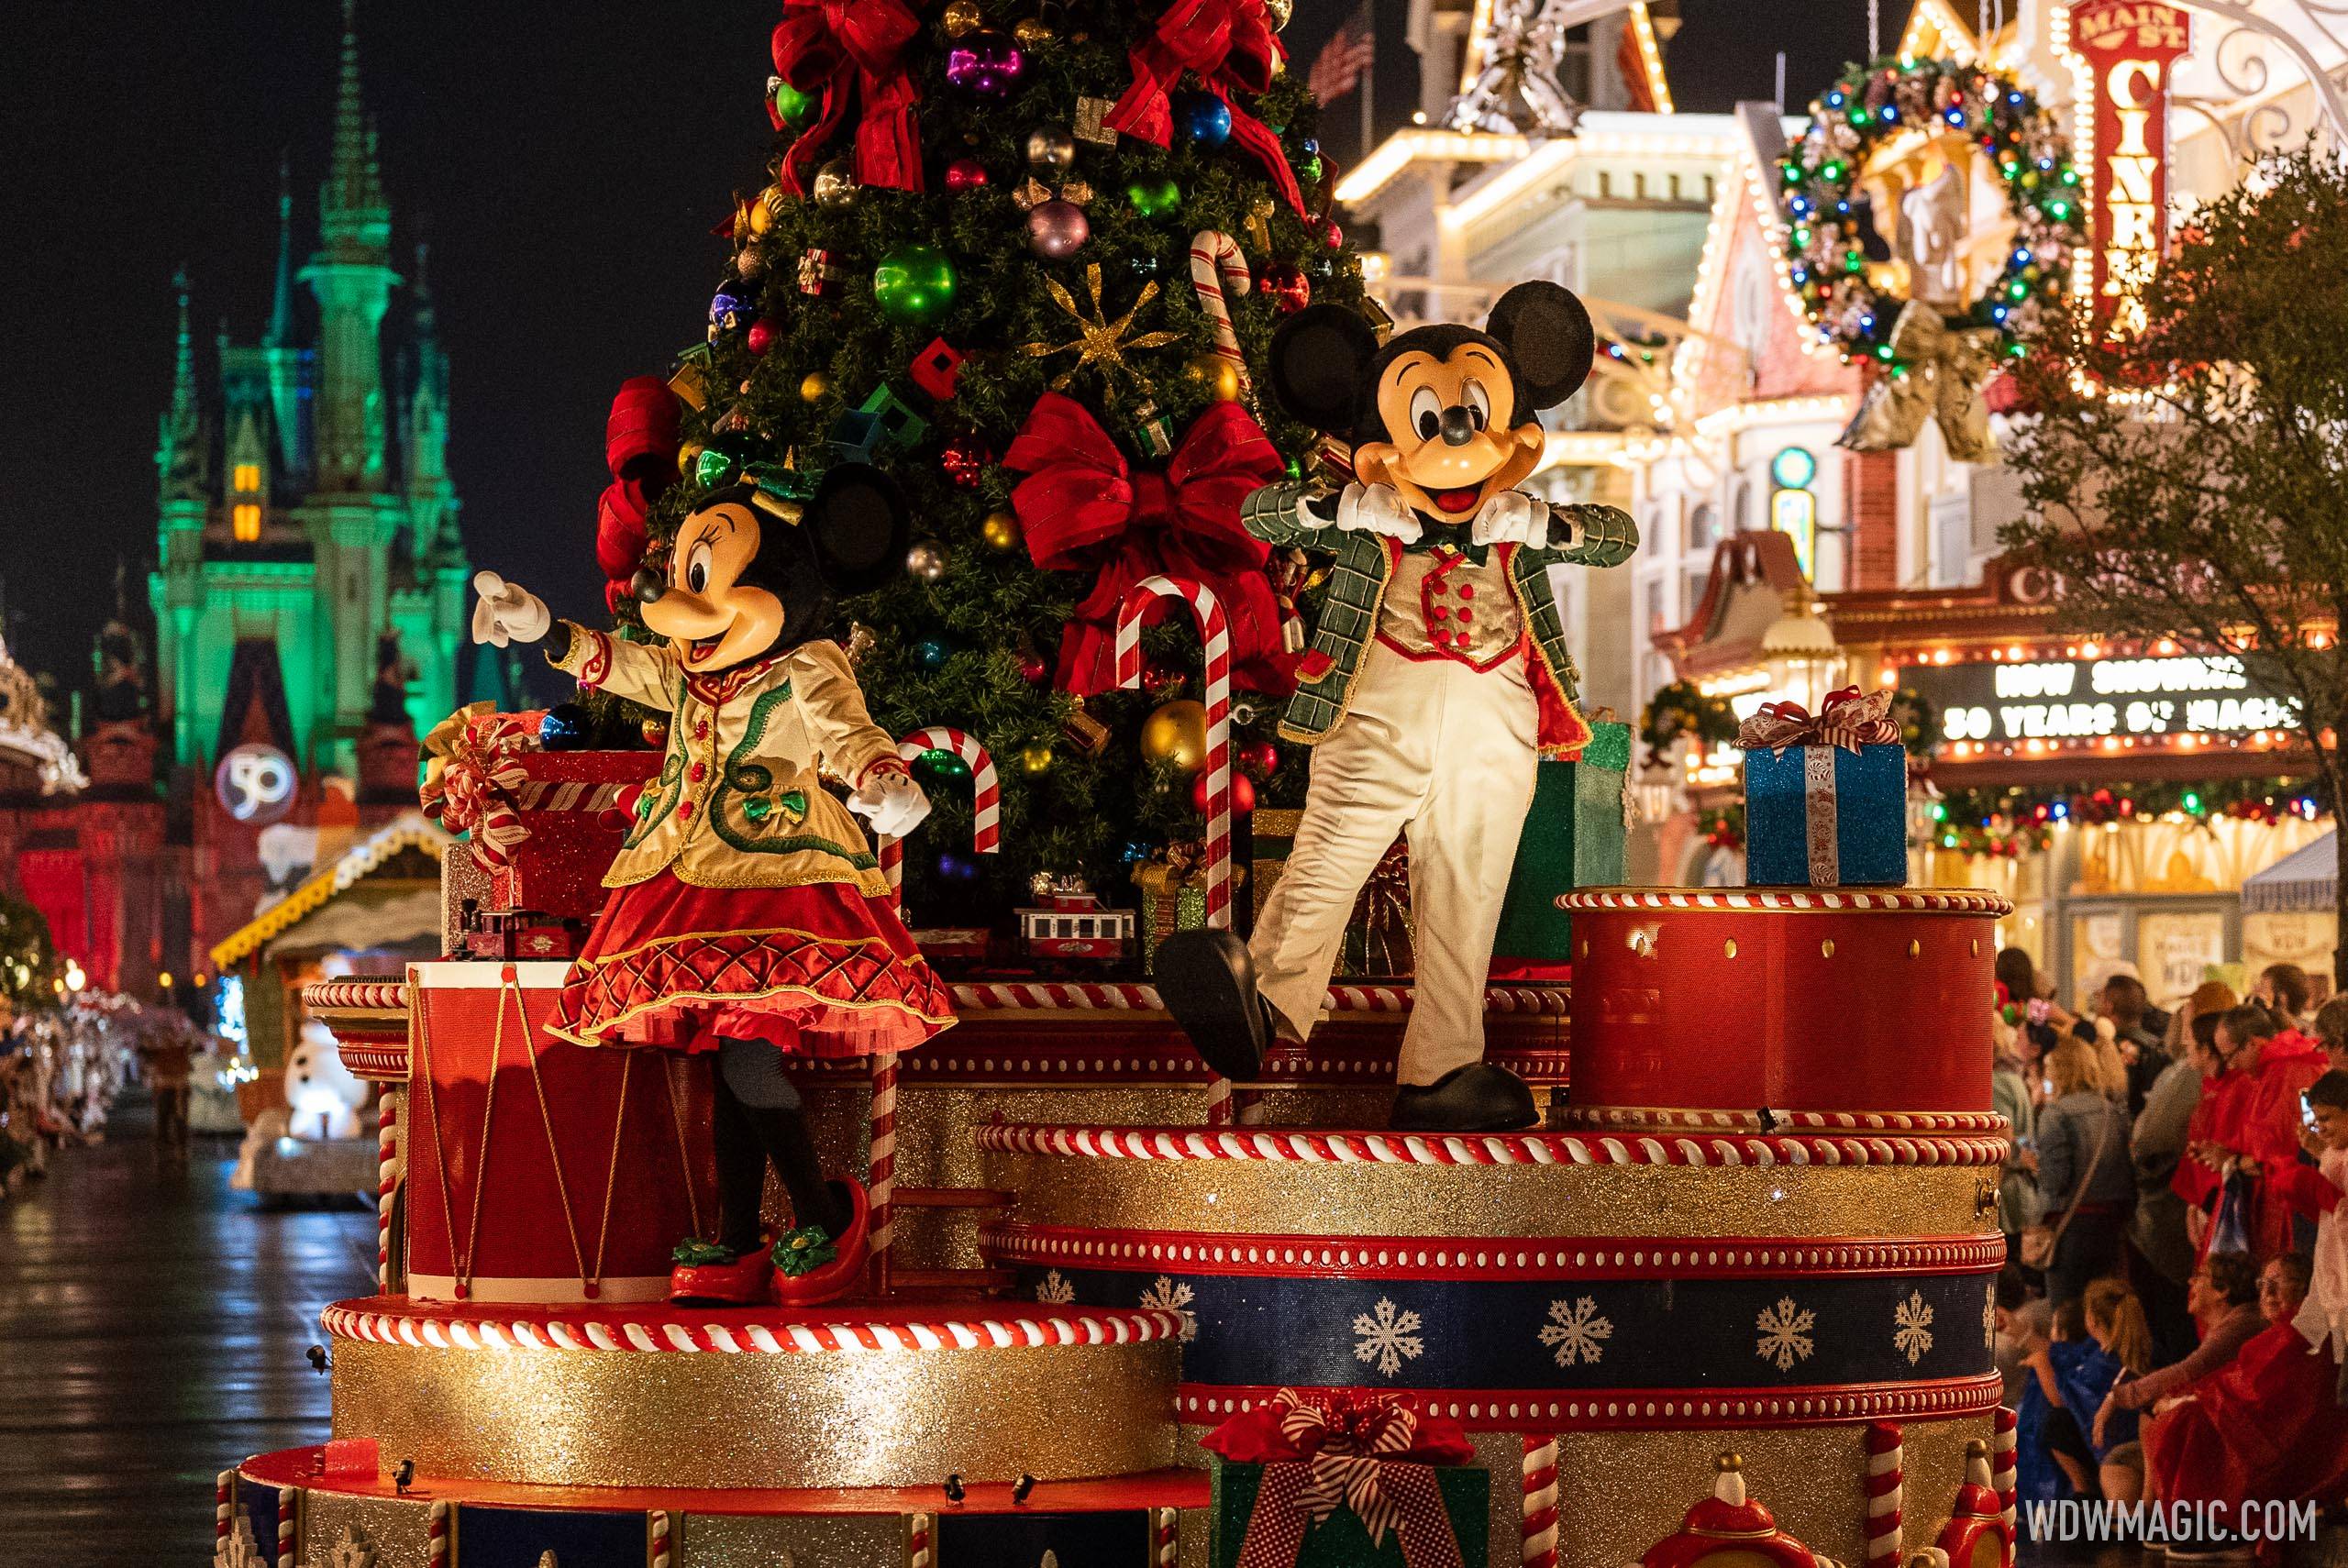 'Mickey's Once Upon a Christmastime Parade' to be shown during regular park hours again this year